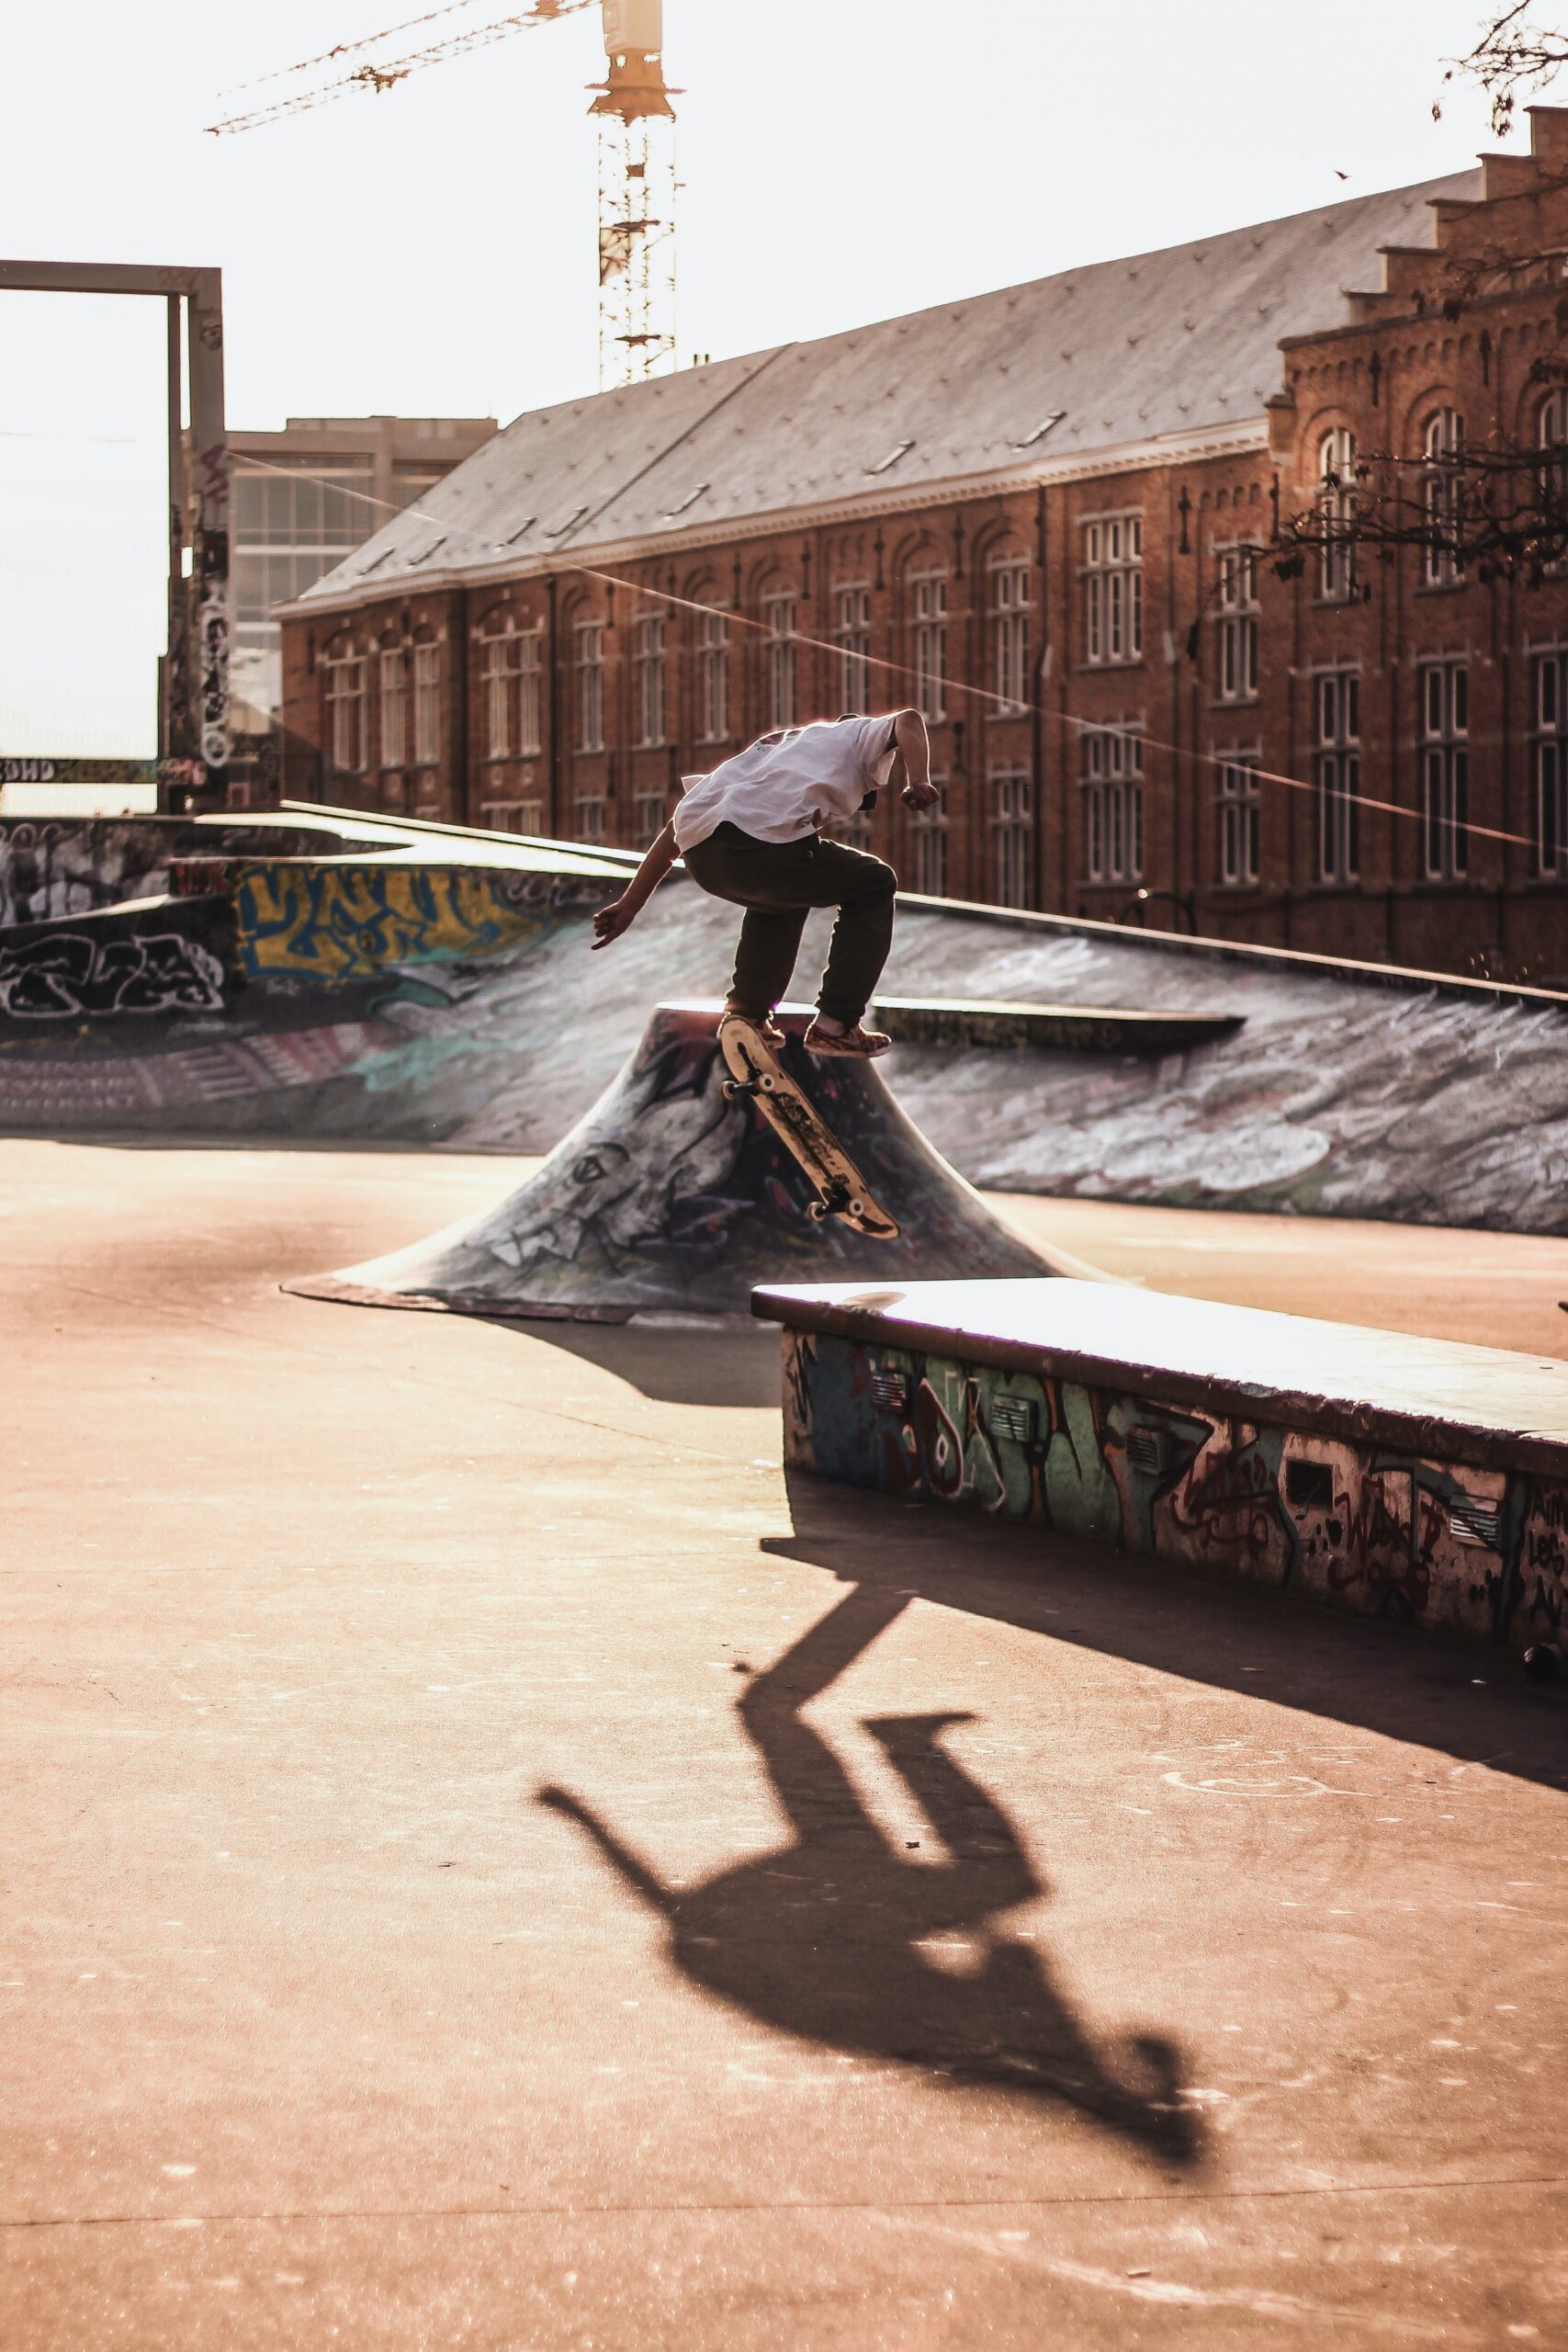 Can You Discuss The Role Of Body Posture In Skateboarding Control And Balance?